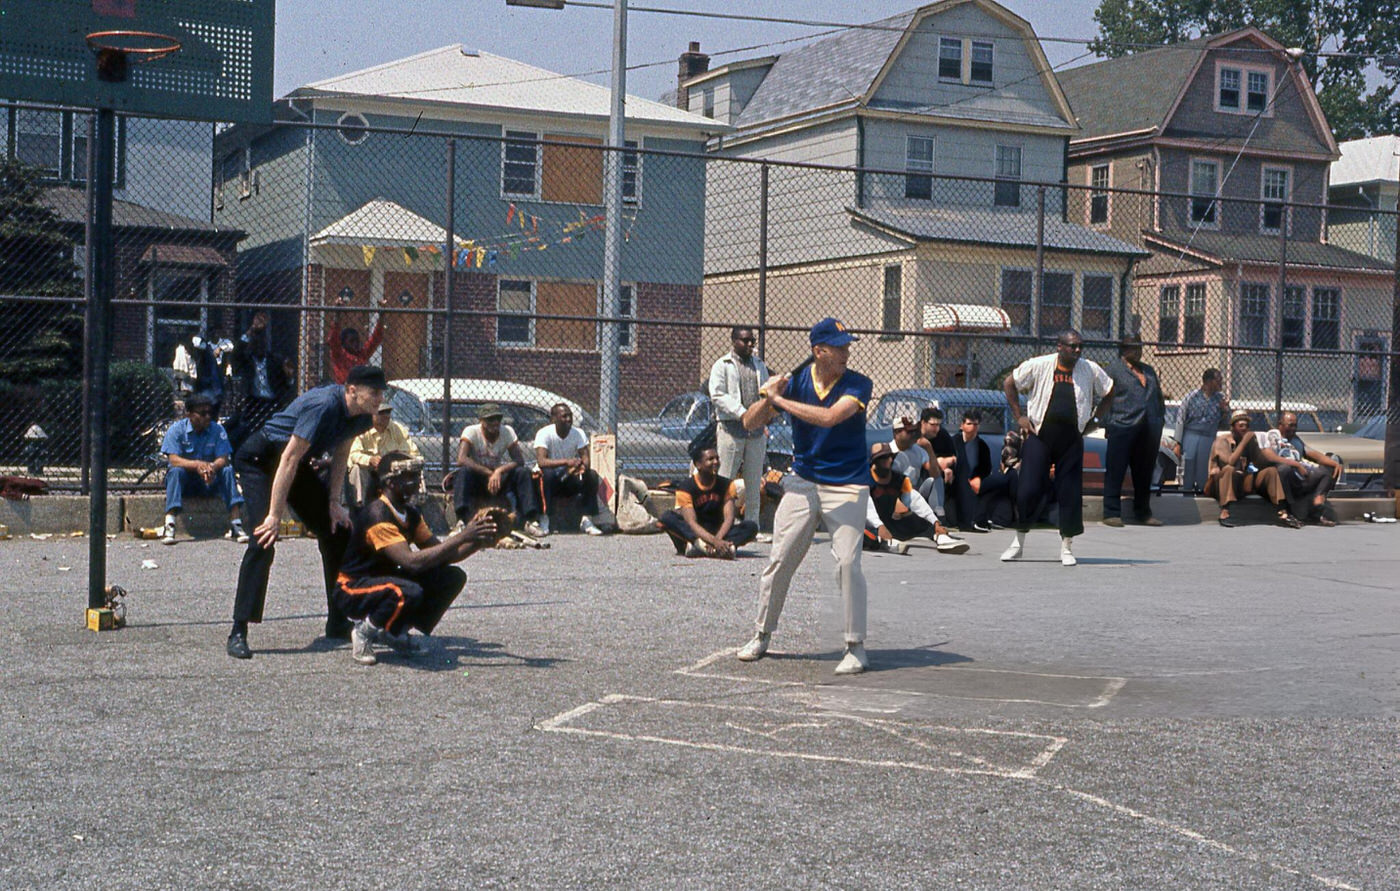 A Softball Game In The Ps 143 Schoolyard In Corona, Queens, 1963.